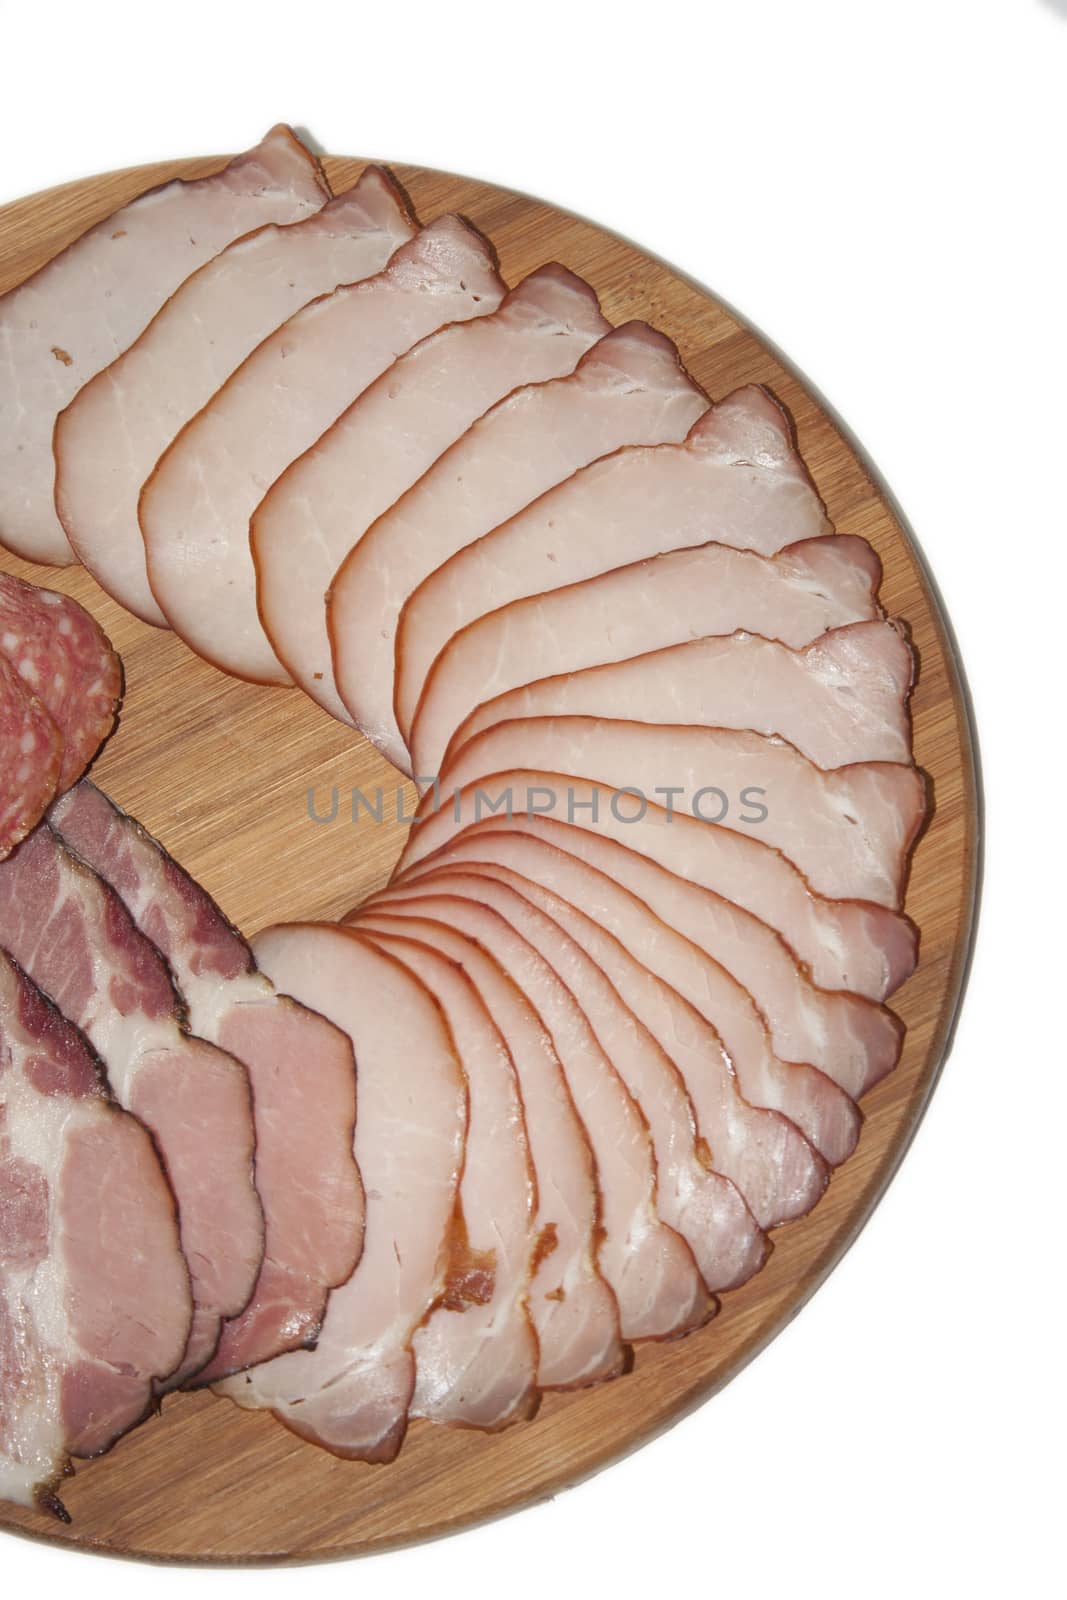 Cutted smoked sirloin on a wooden board on the white background.